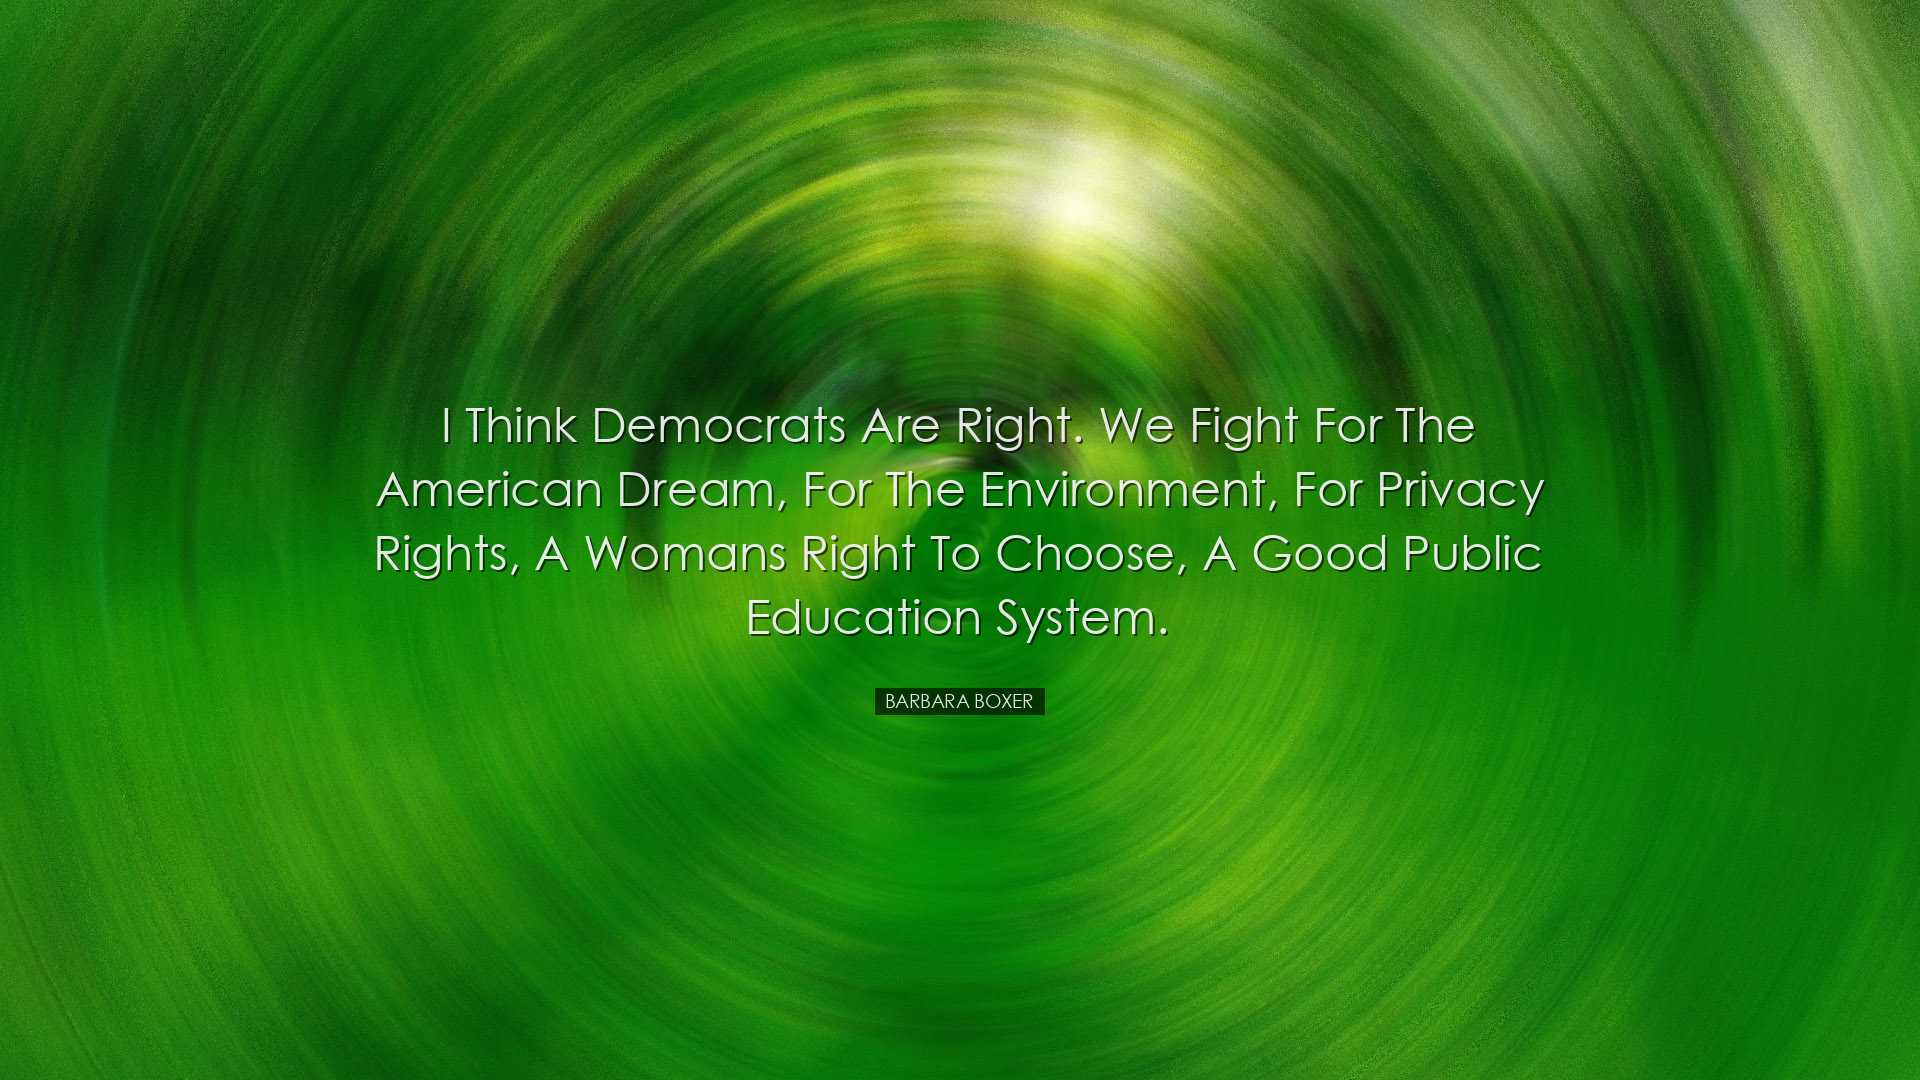 I think Democrats are right. We fight for the American dream, for